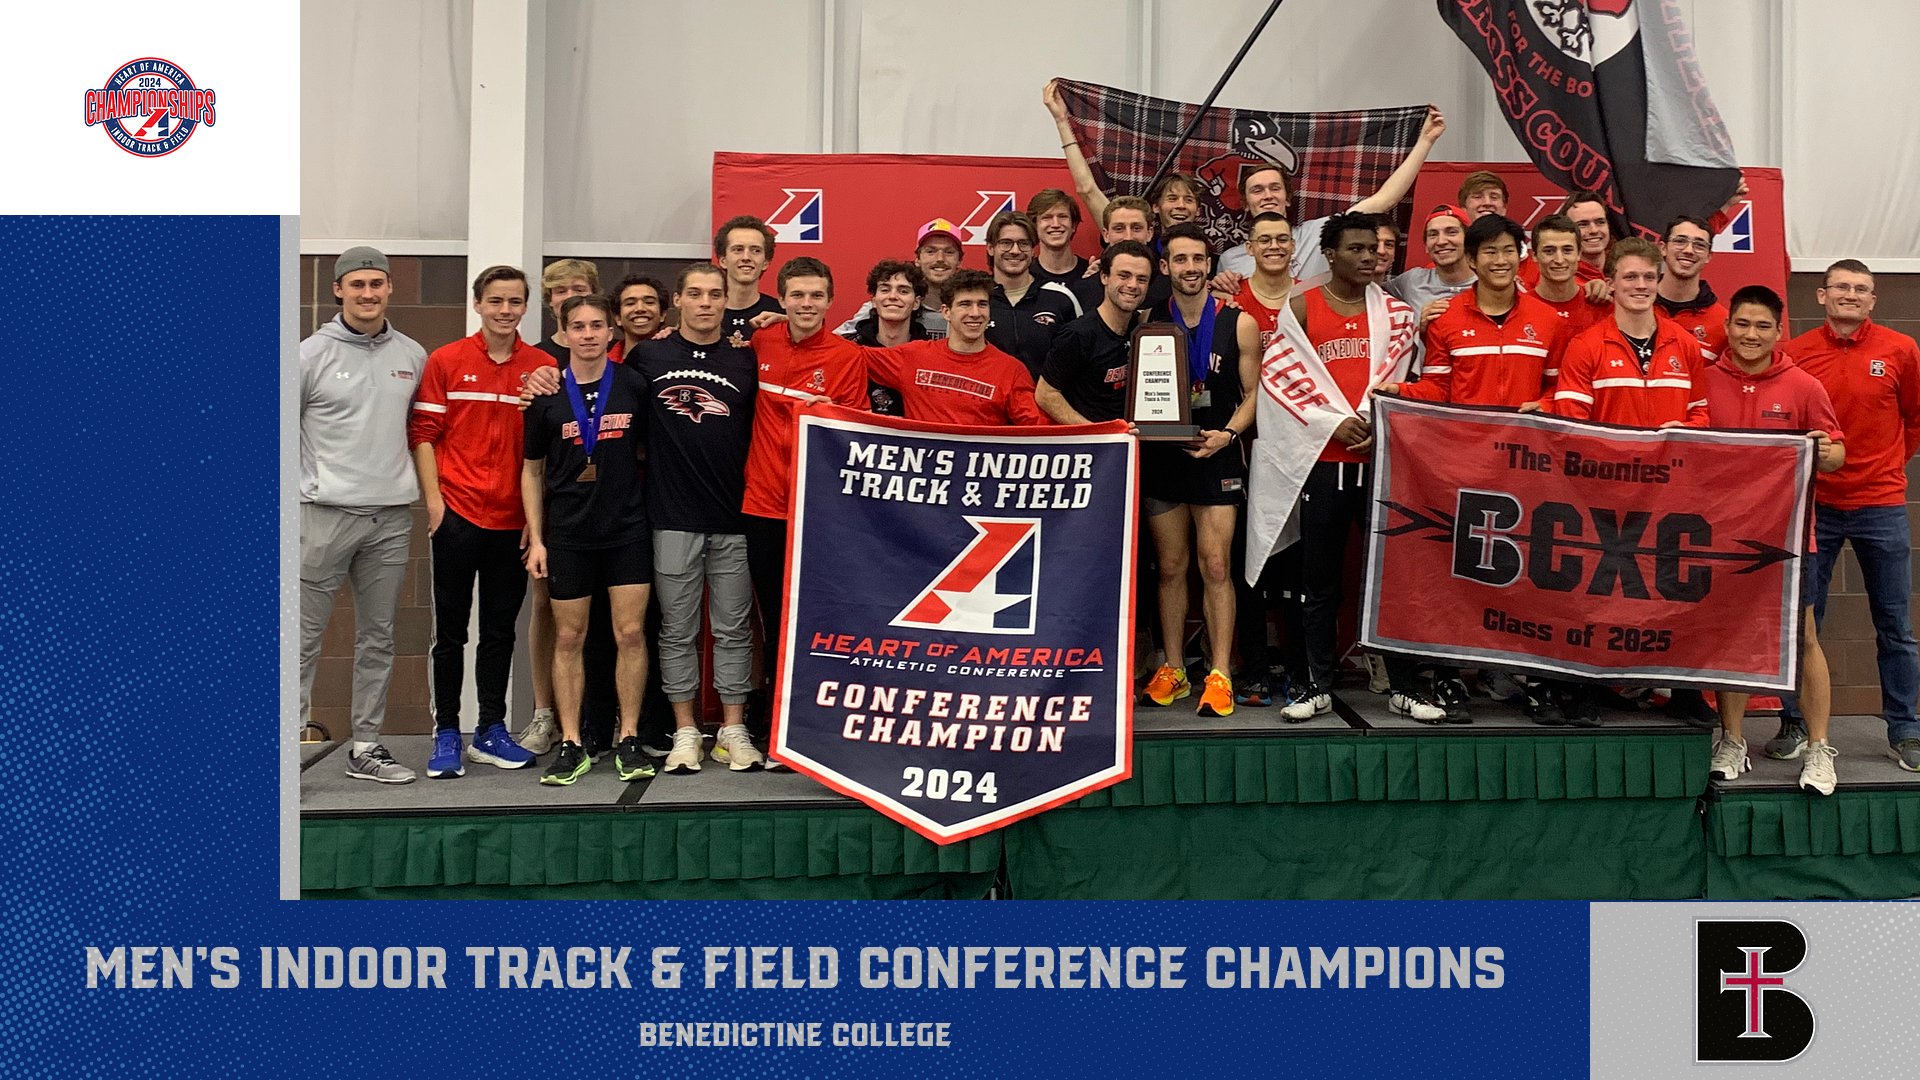 Benedictine College Wins First-Ever Heart Men’s Indoor Track & Field Conference Championship